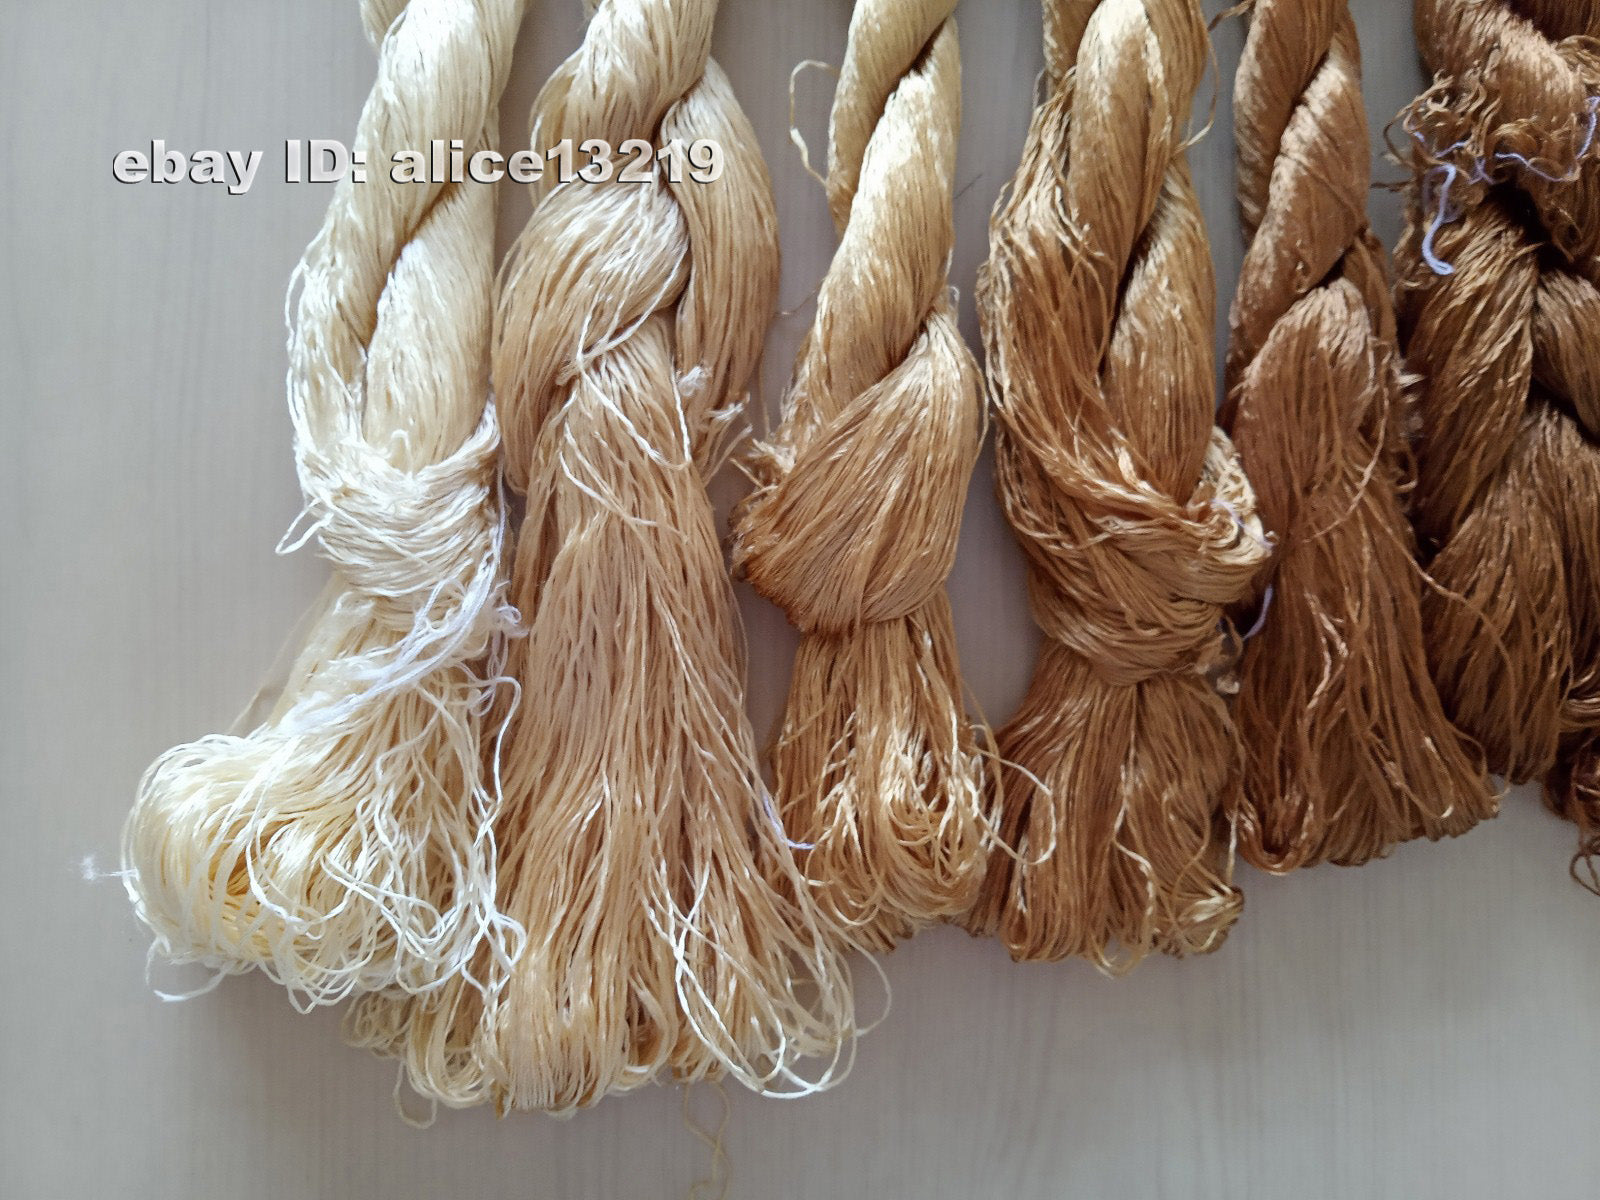 7bundles 100%real mulberry silk,hand-dyed embroidery silk floss/thread N54